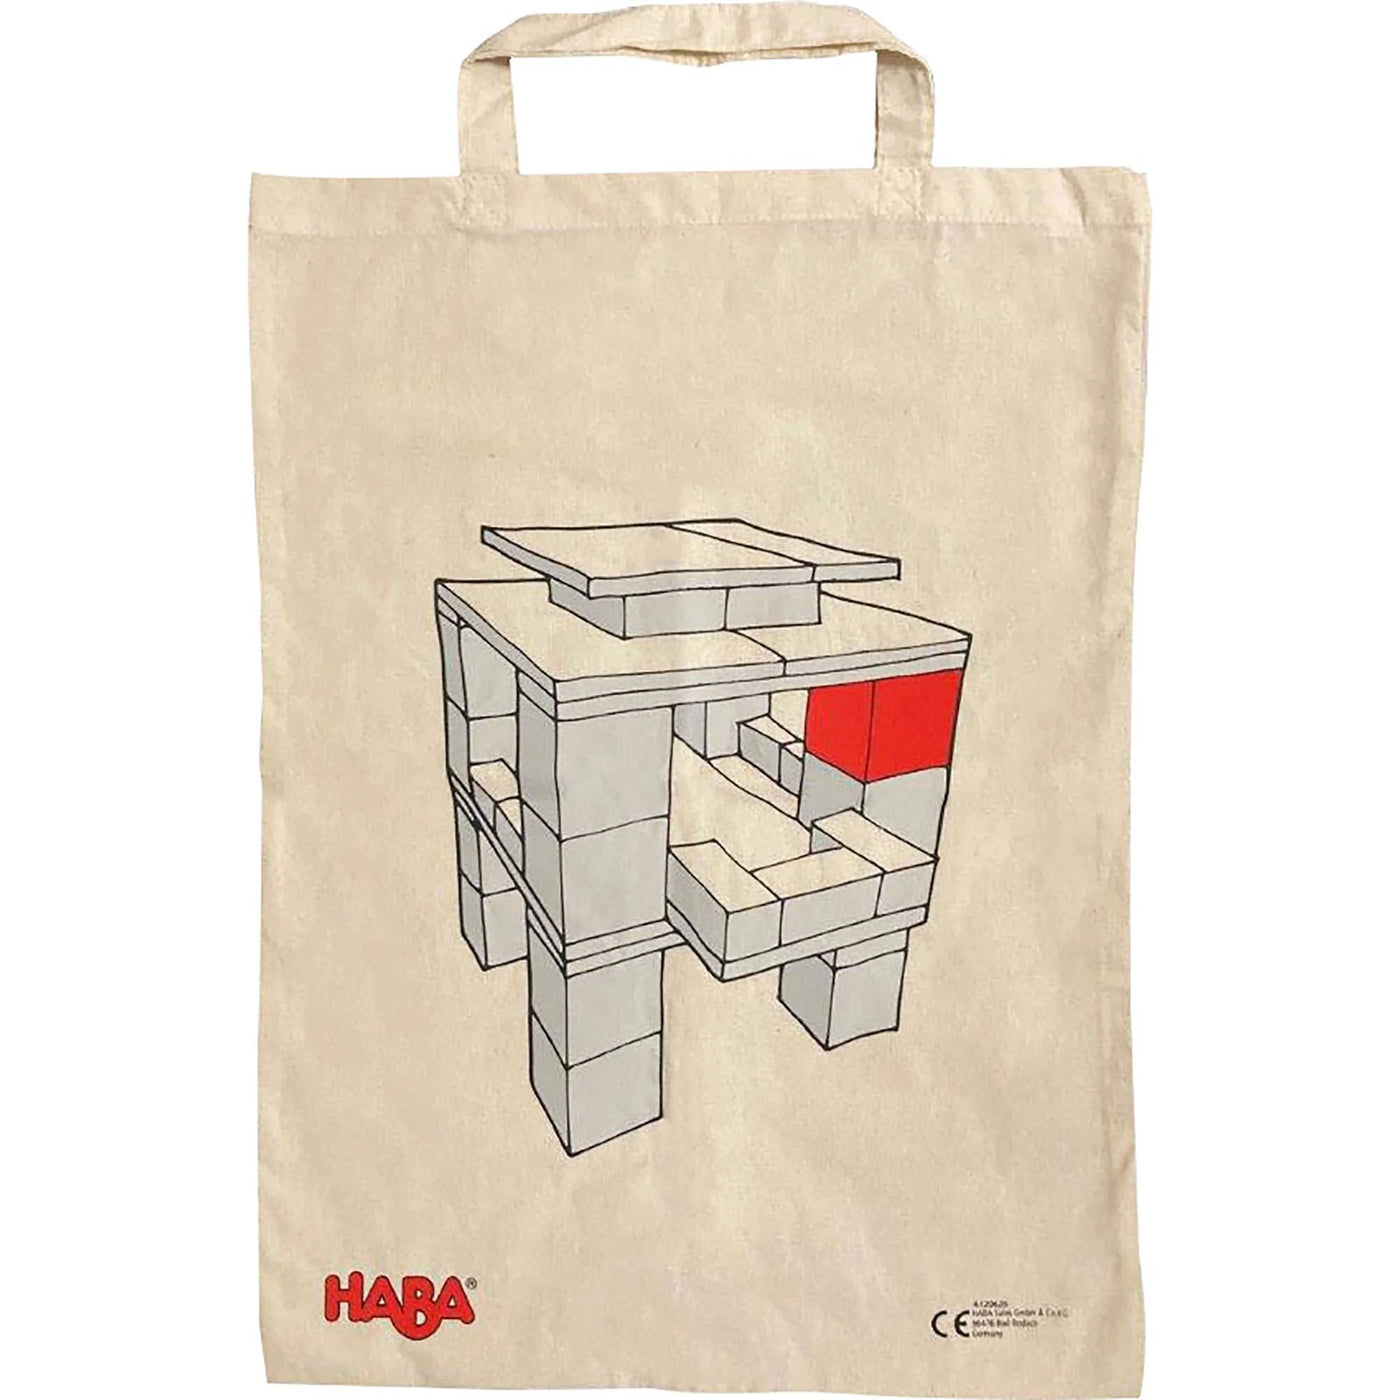 Haba - Clever up 1.0